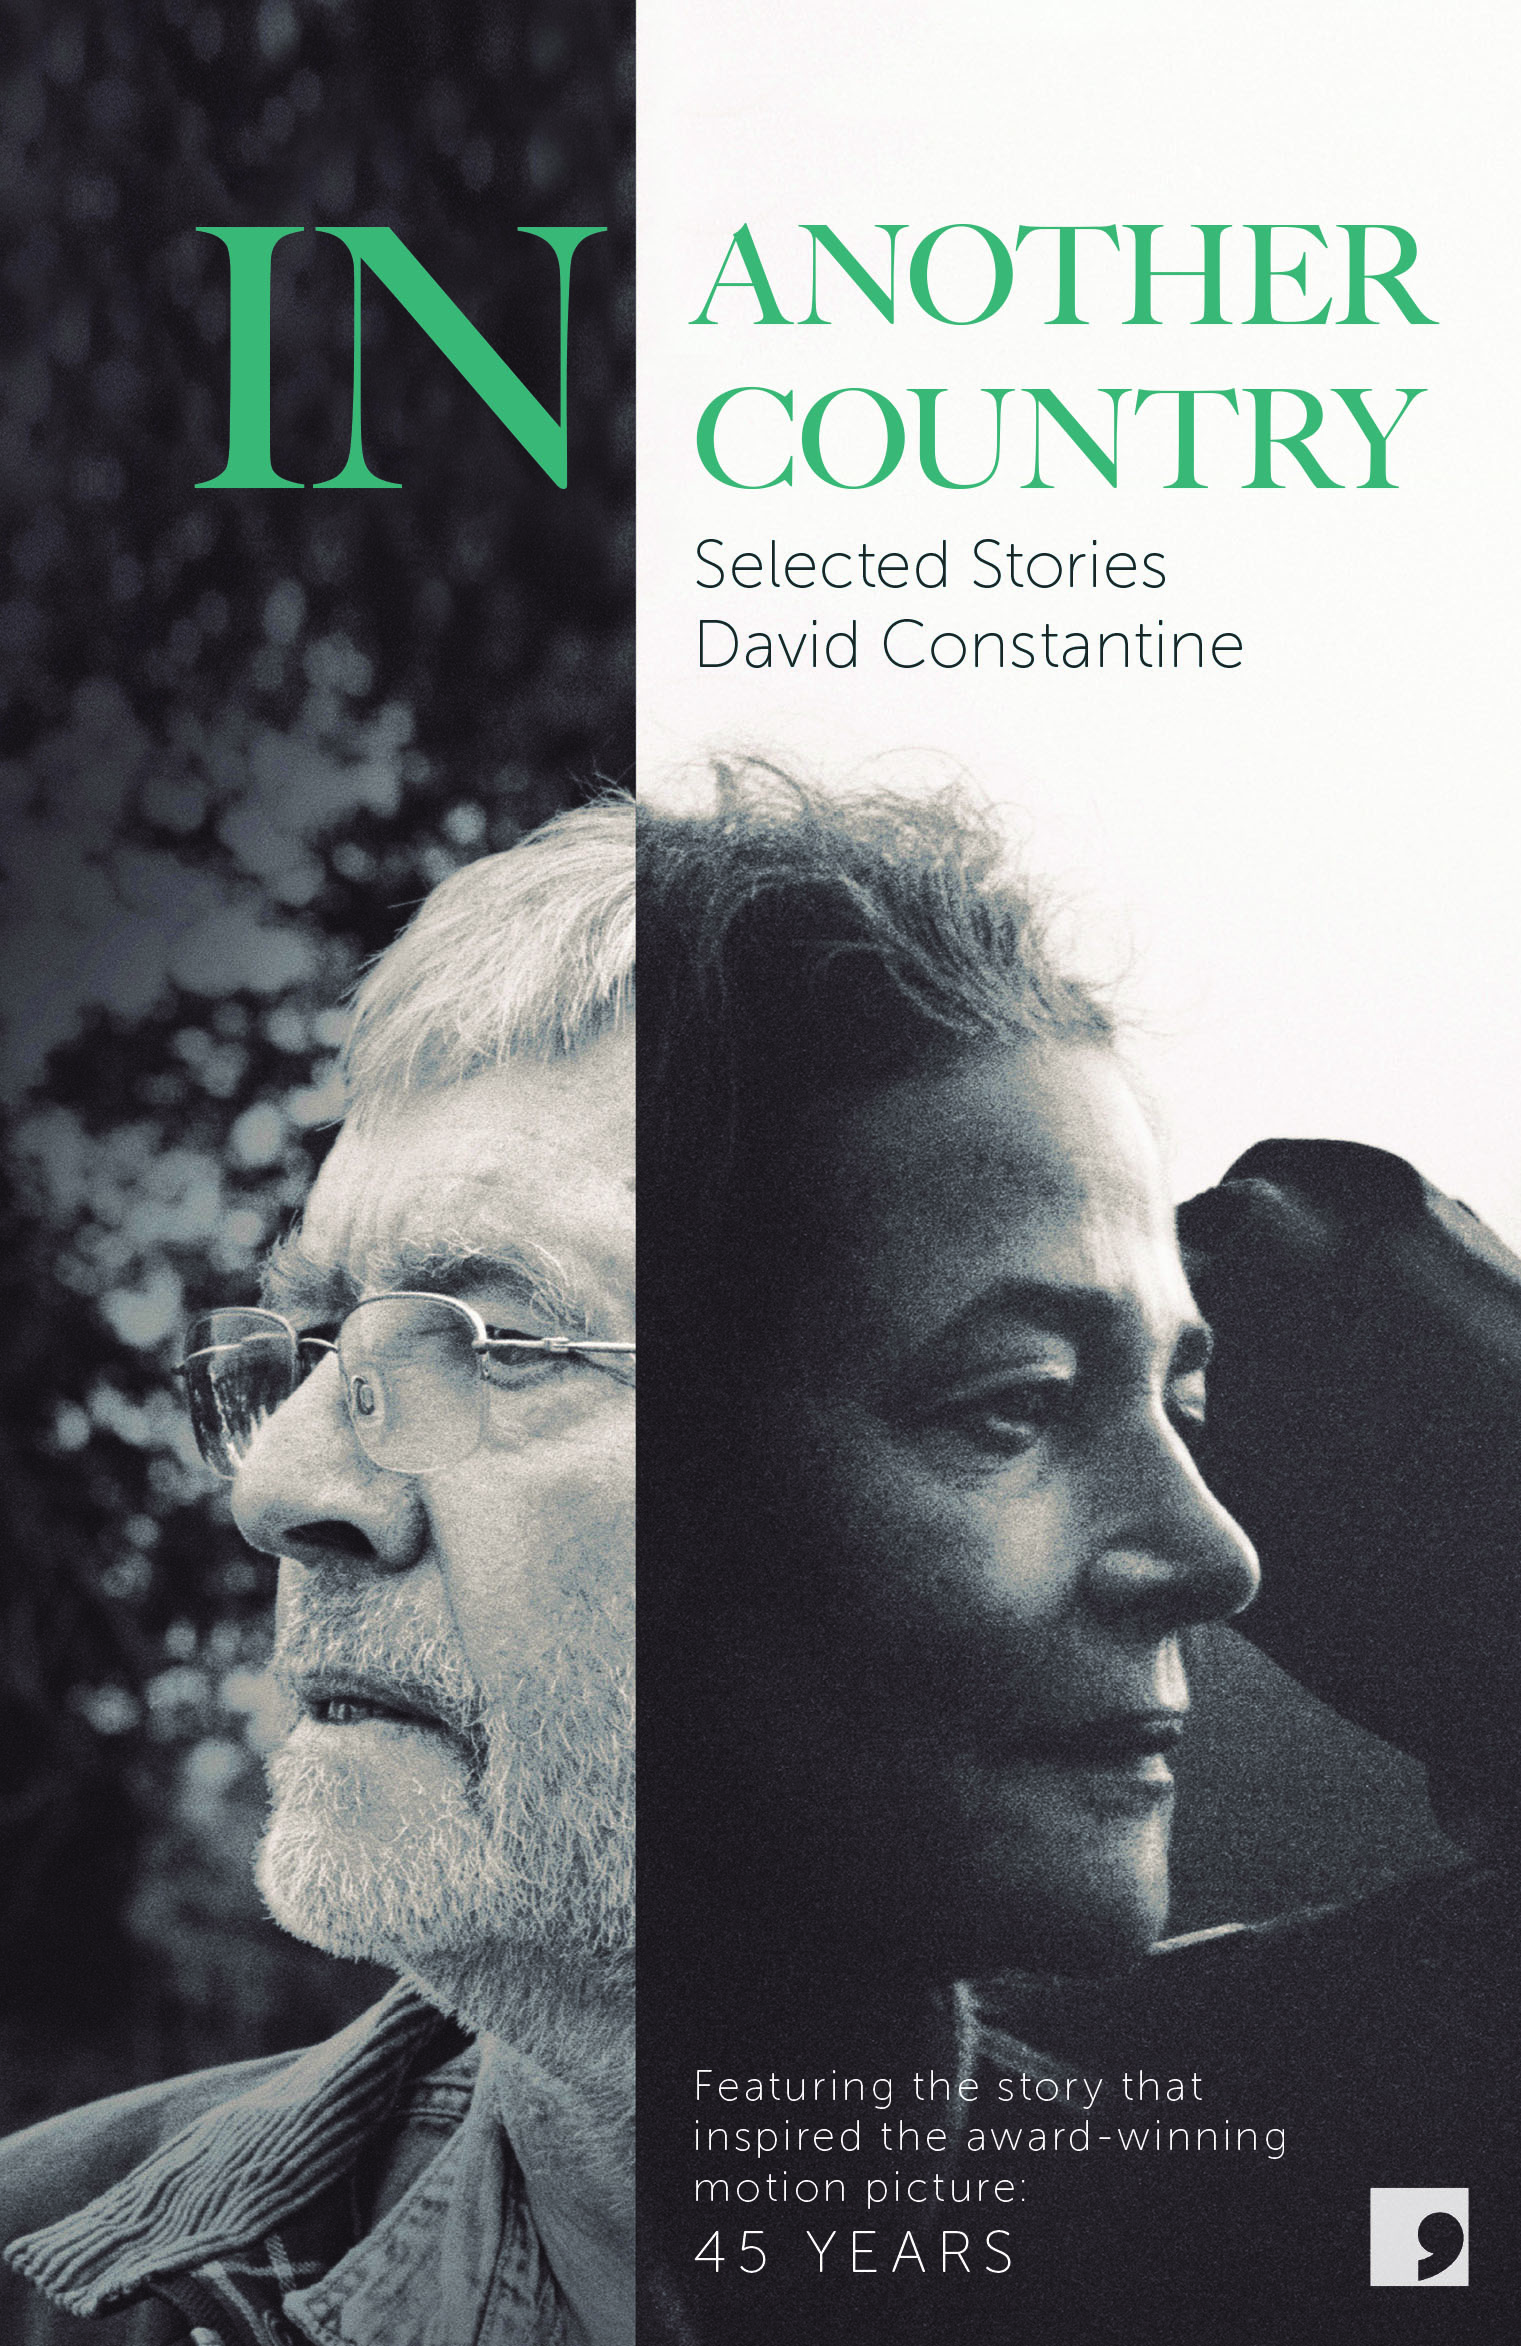 In Another Country book cover